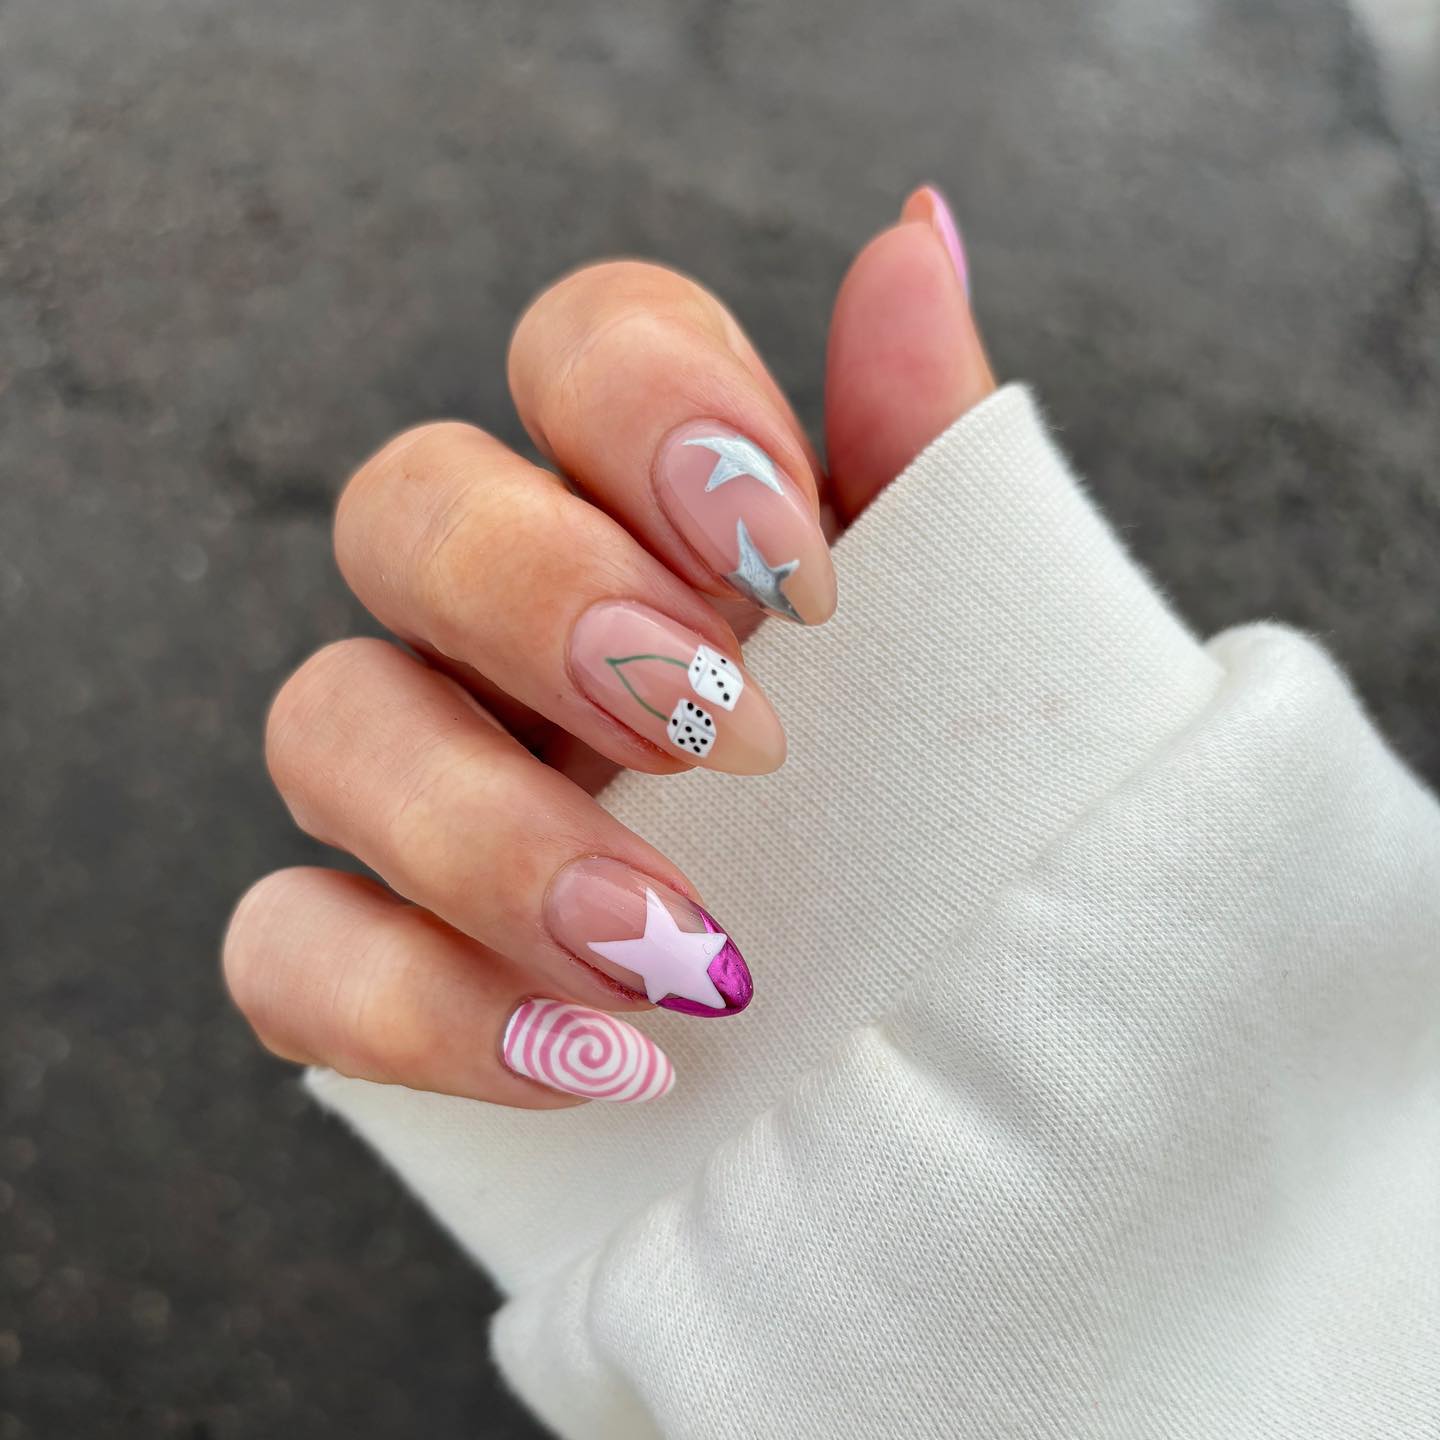 100 Pretty Spring Nail Designs To Try This Year images 105